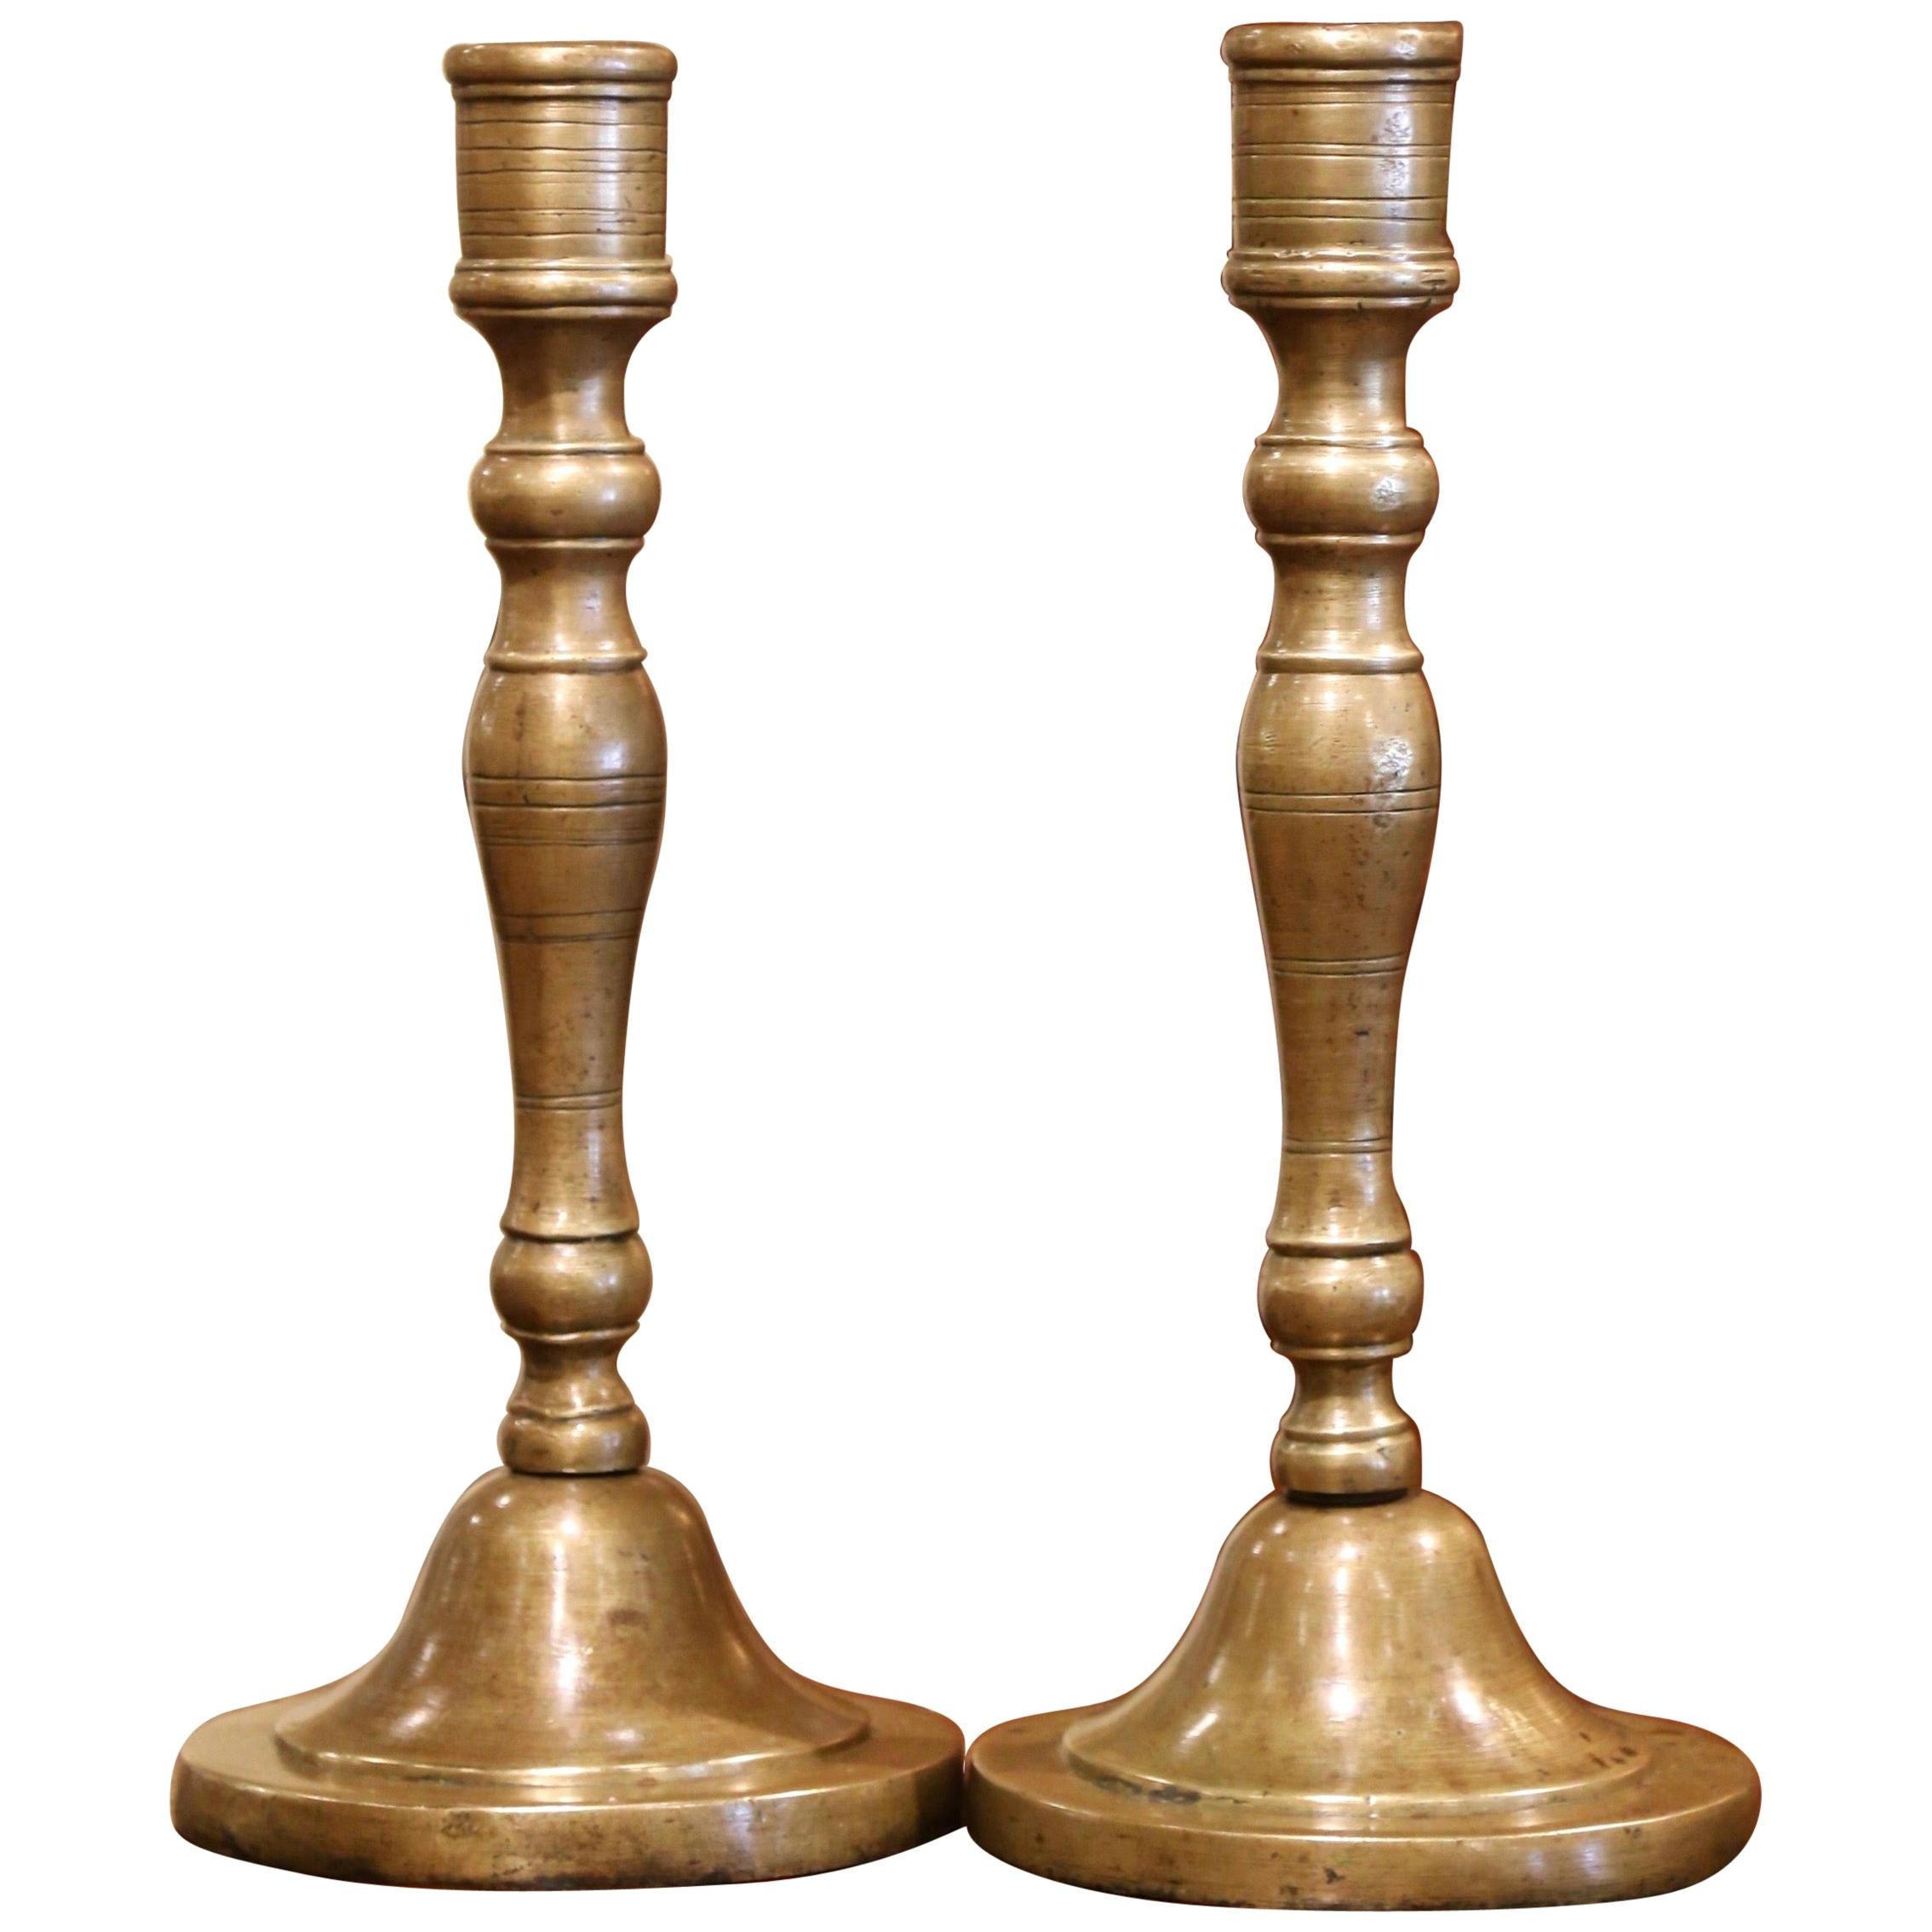 Pair of Mid-18th Century Louis XIV French Bronze Candlesticks